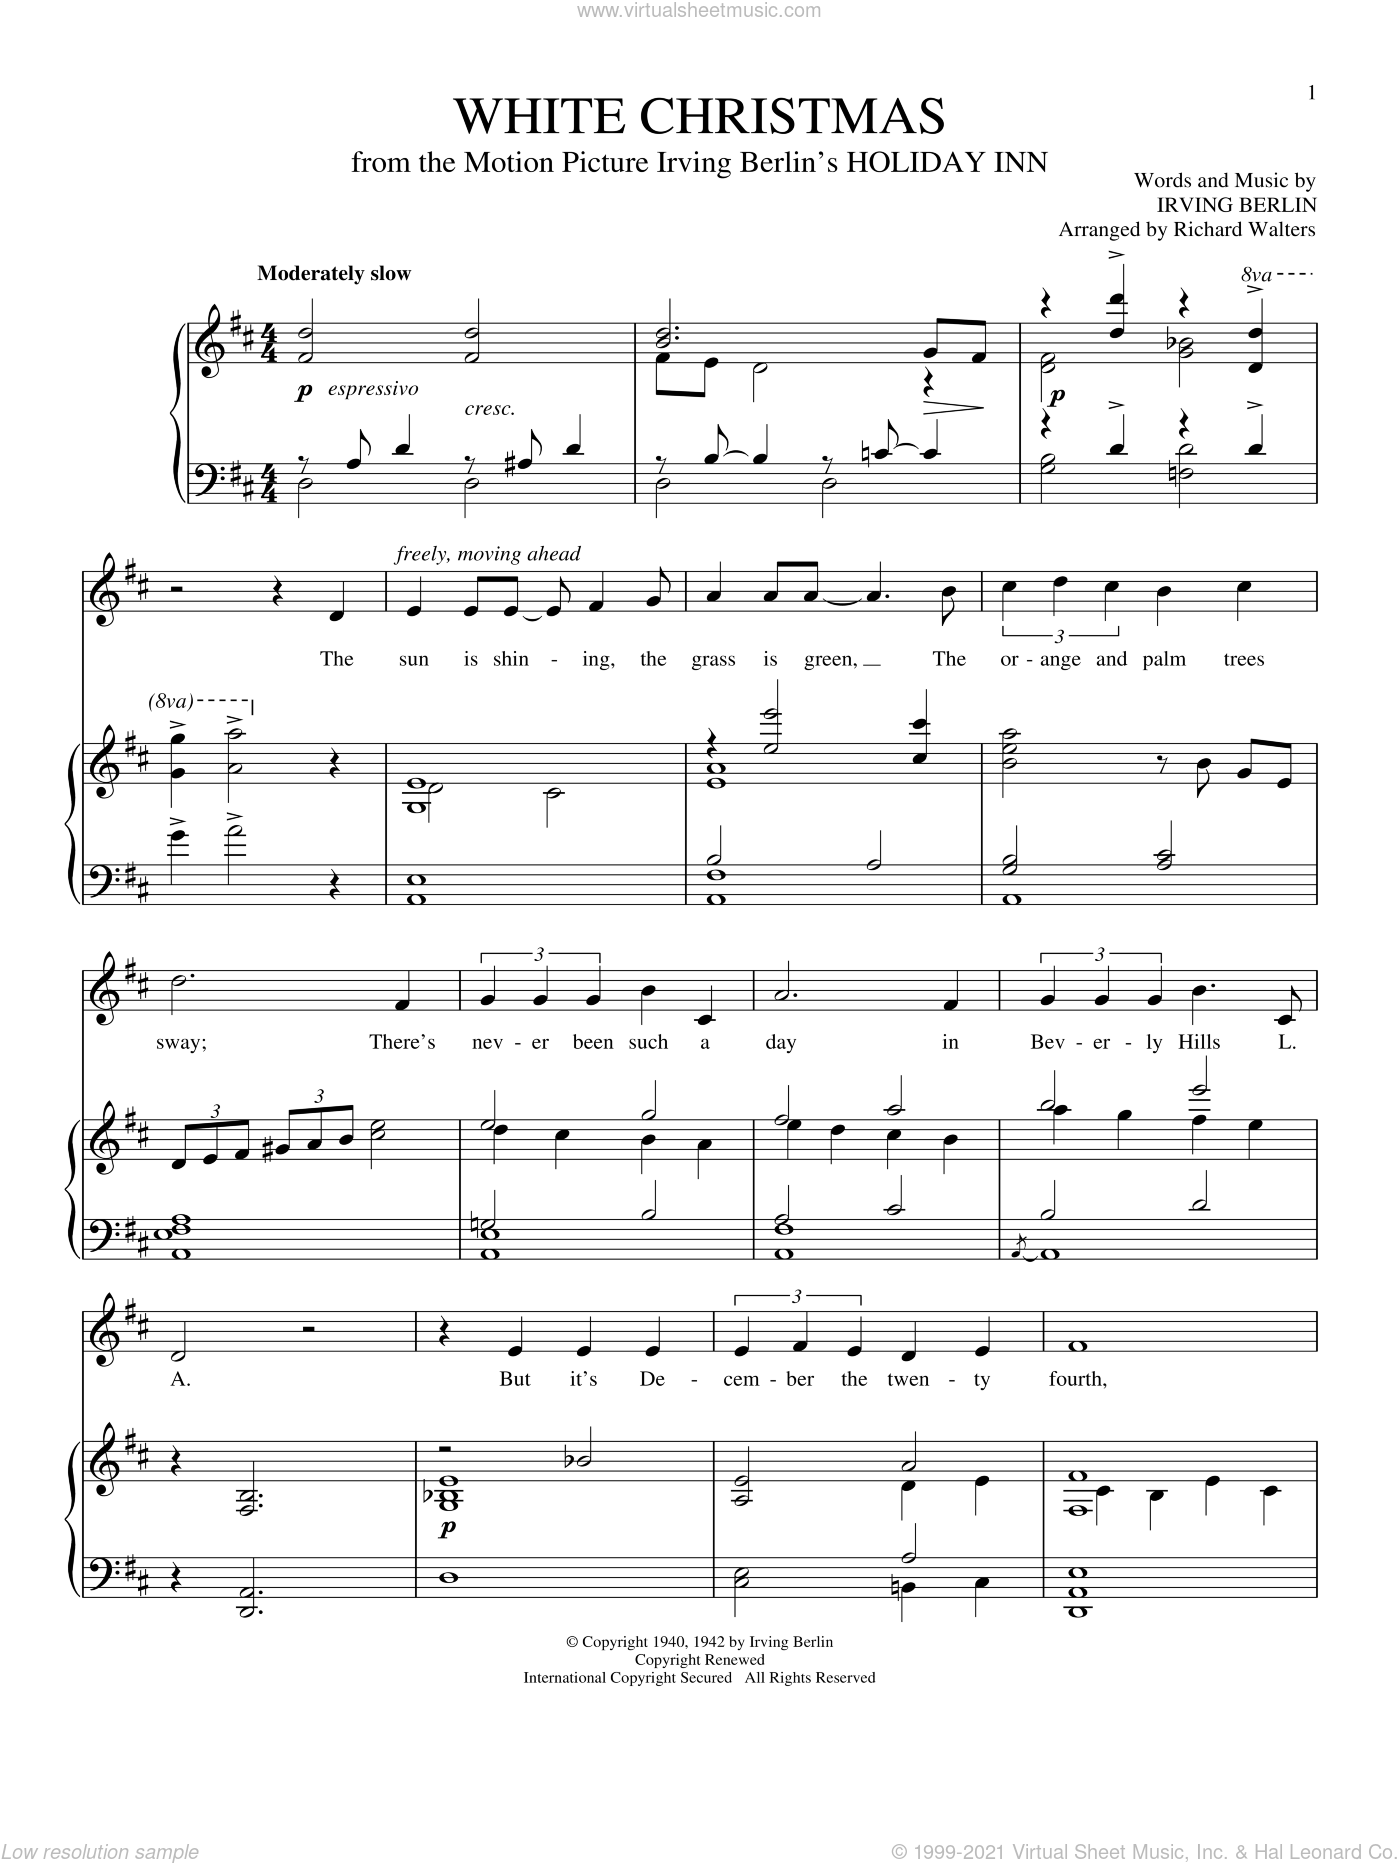 Berlin - White Christmas sheet music for voice and piano PDF